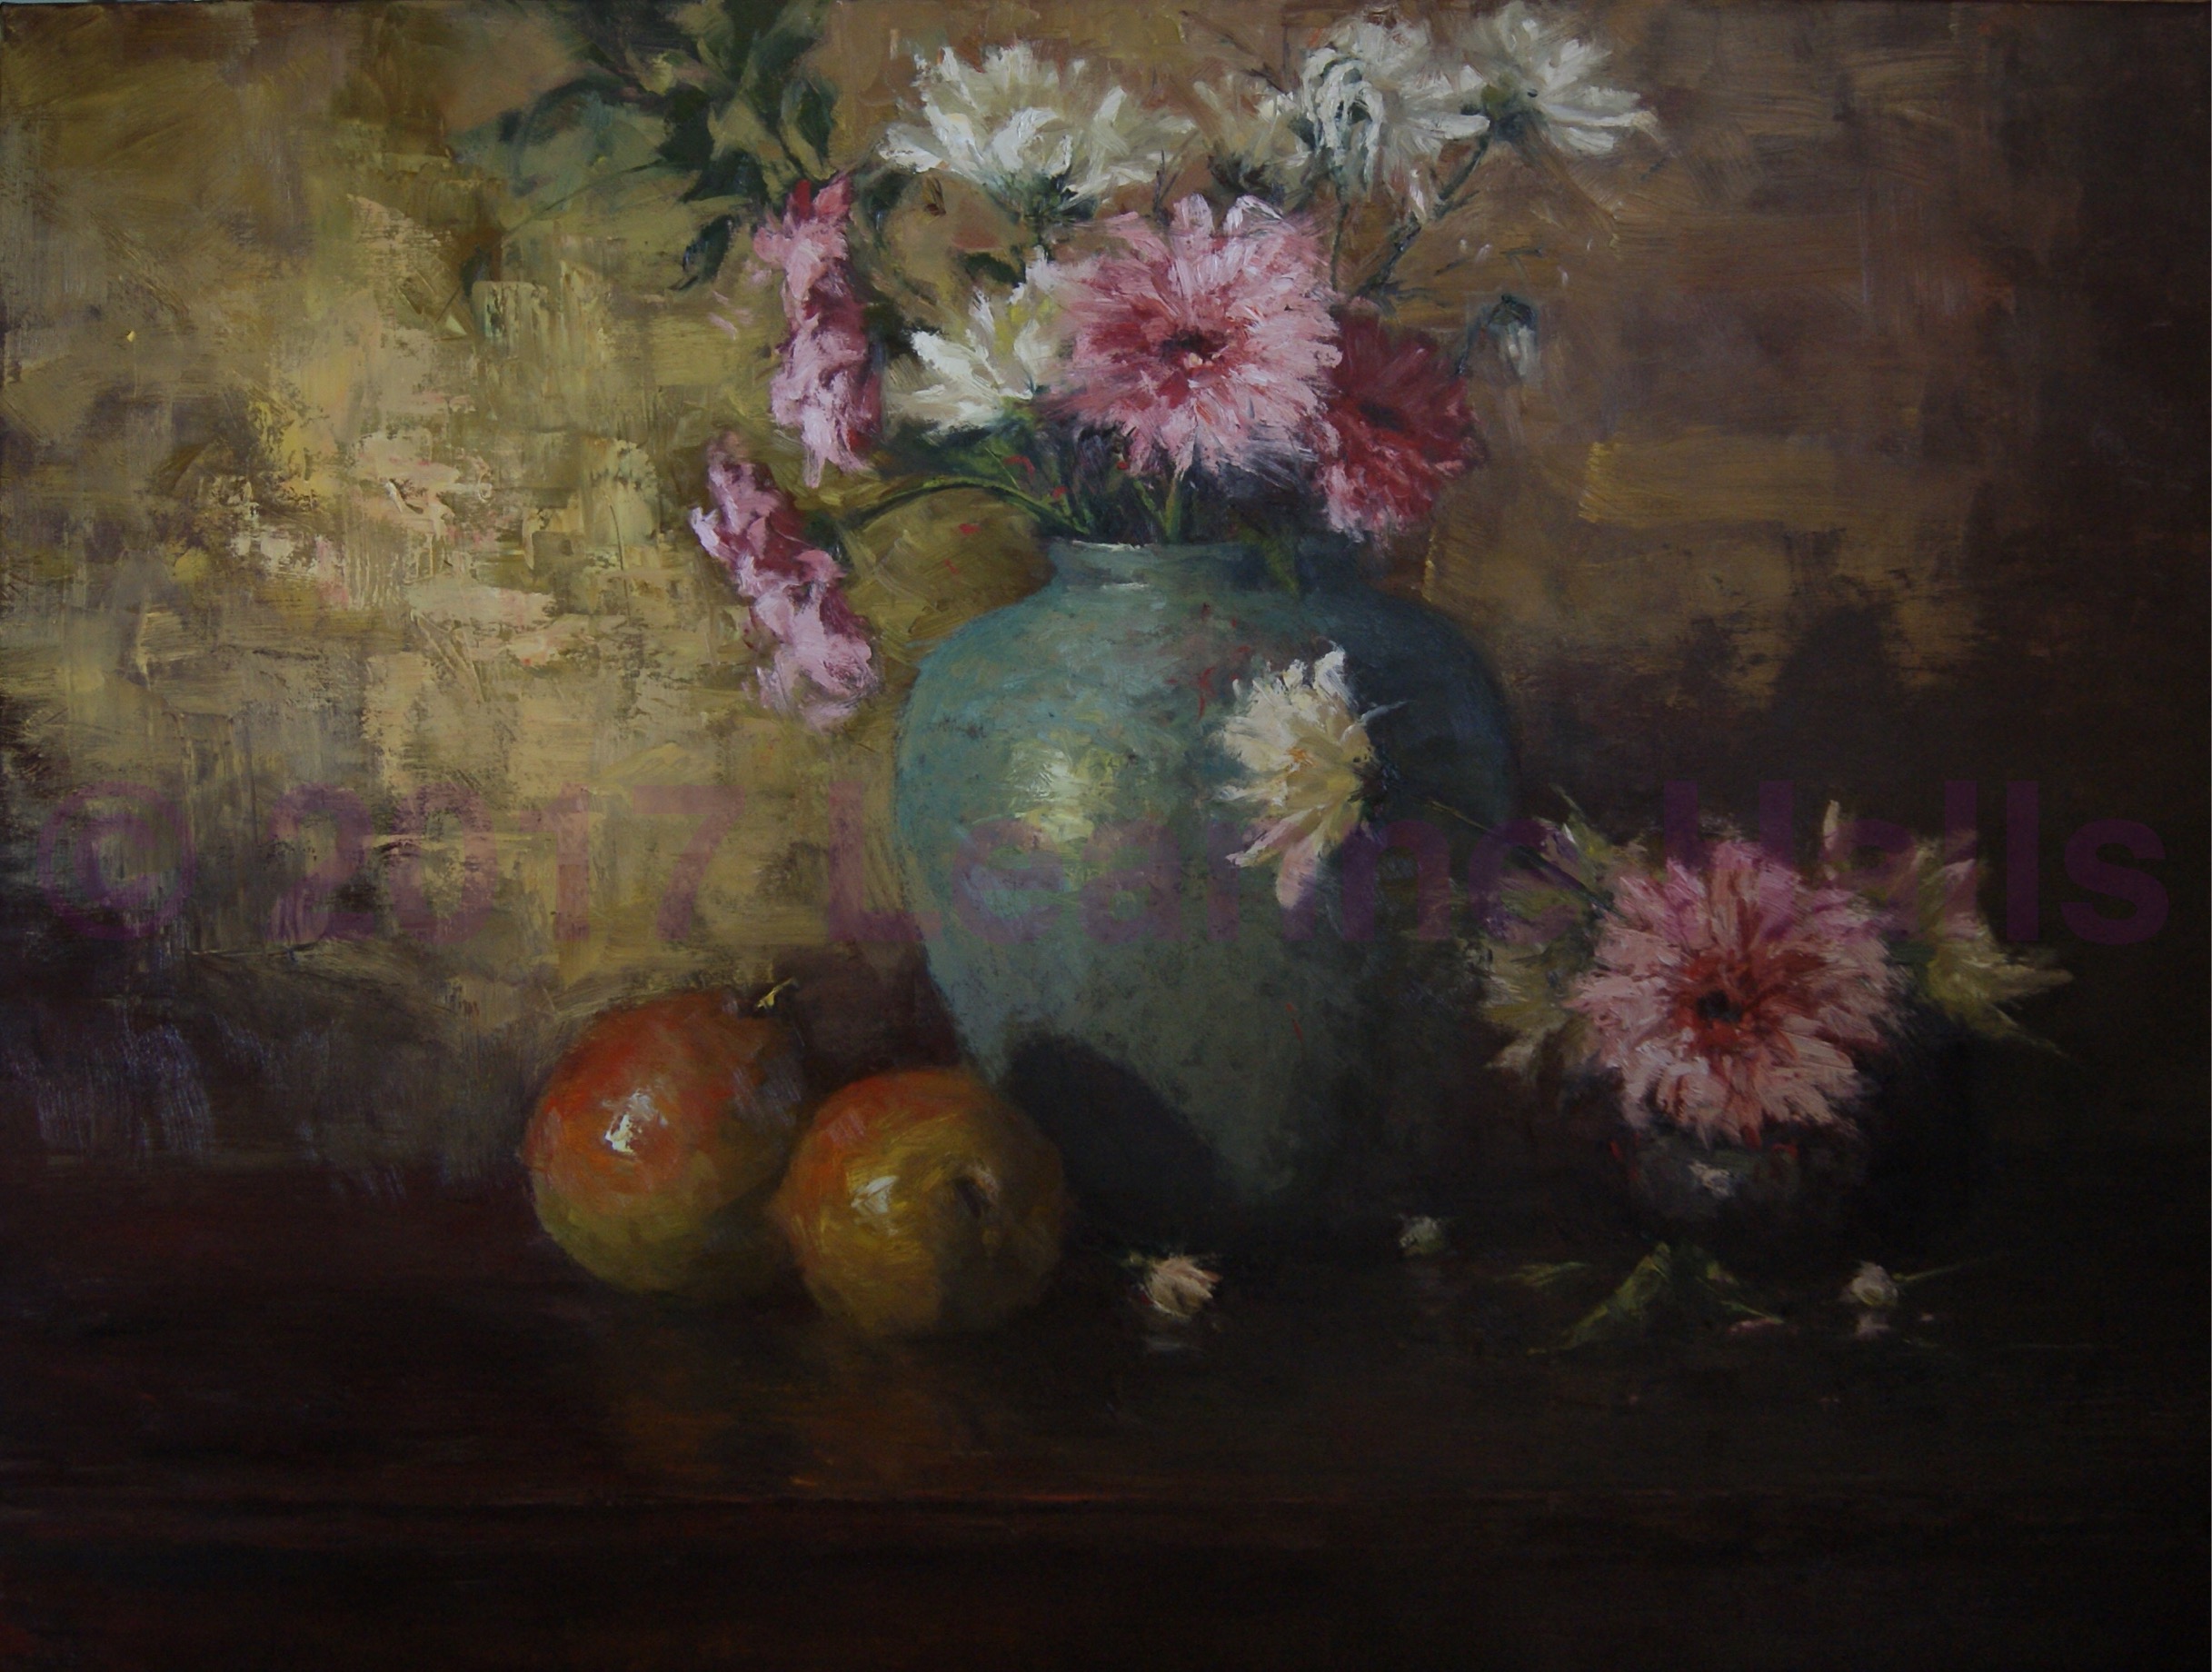 Flowers and Green Vase